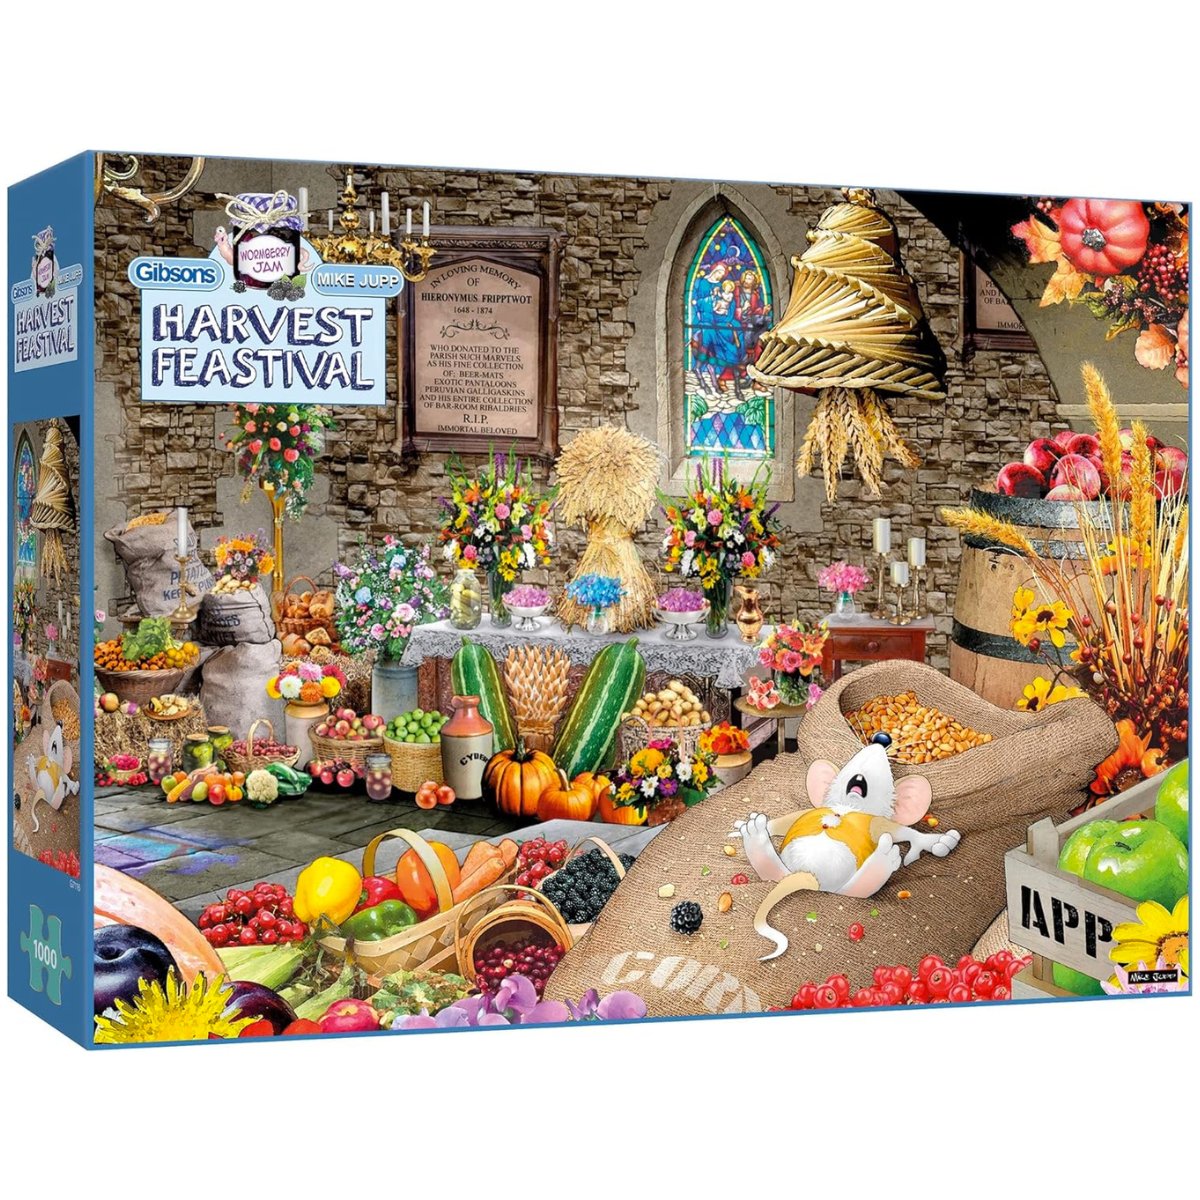 Gibsons Harvest Feastival Jigsaw Puzzle (1000 Pieces) - Mike Jupp